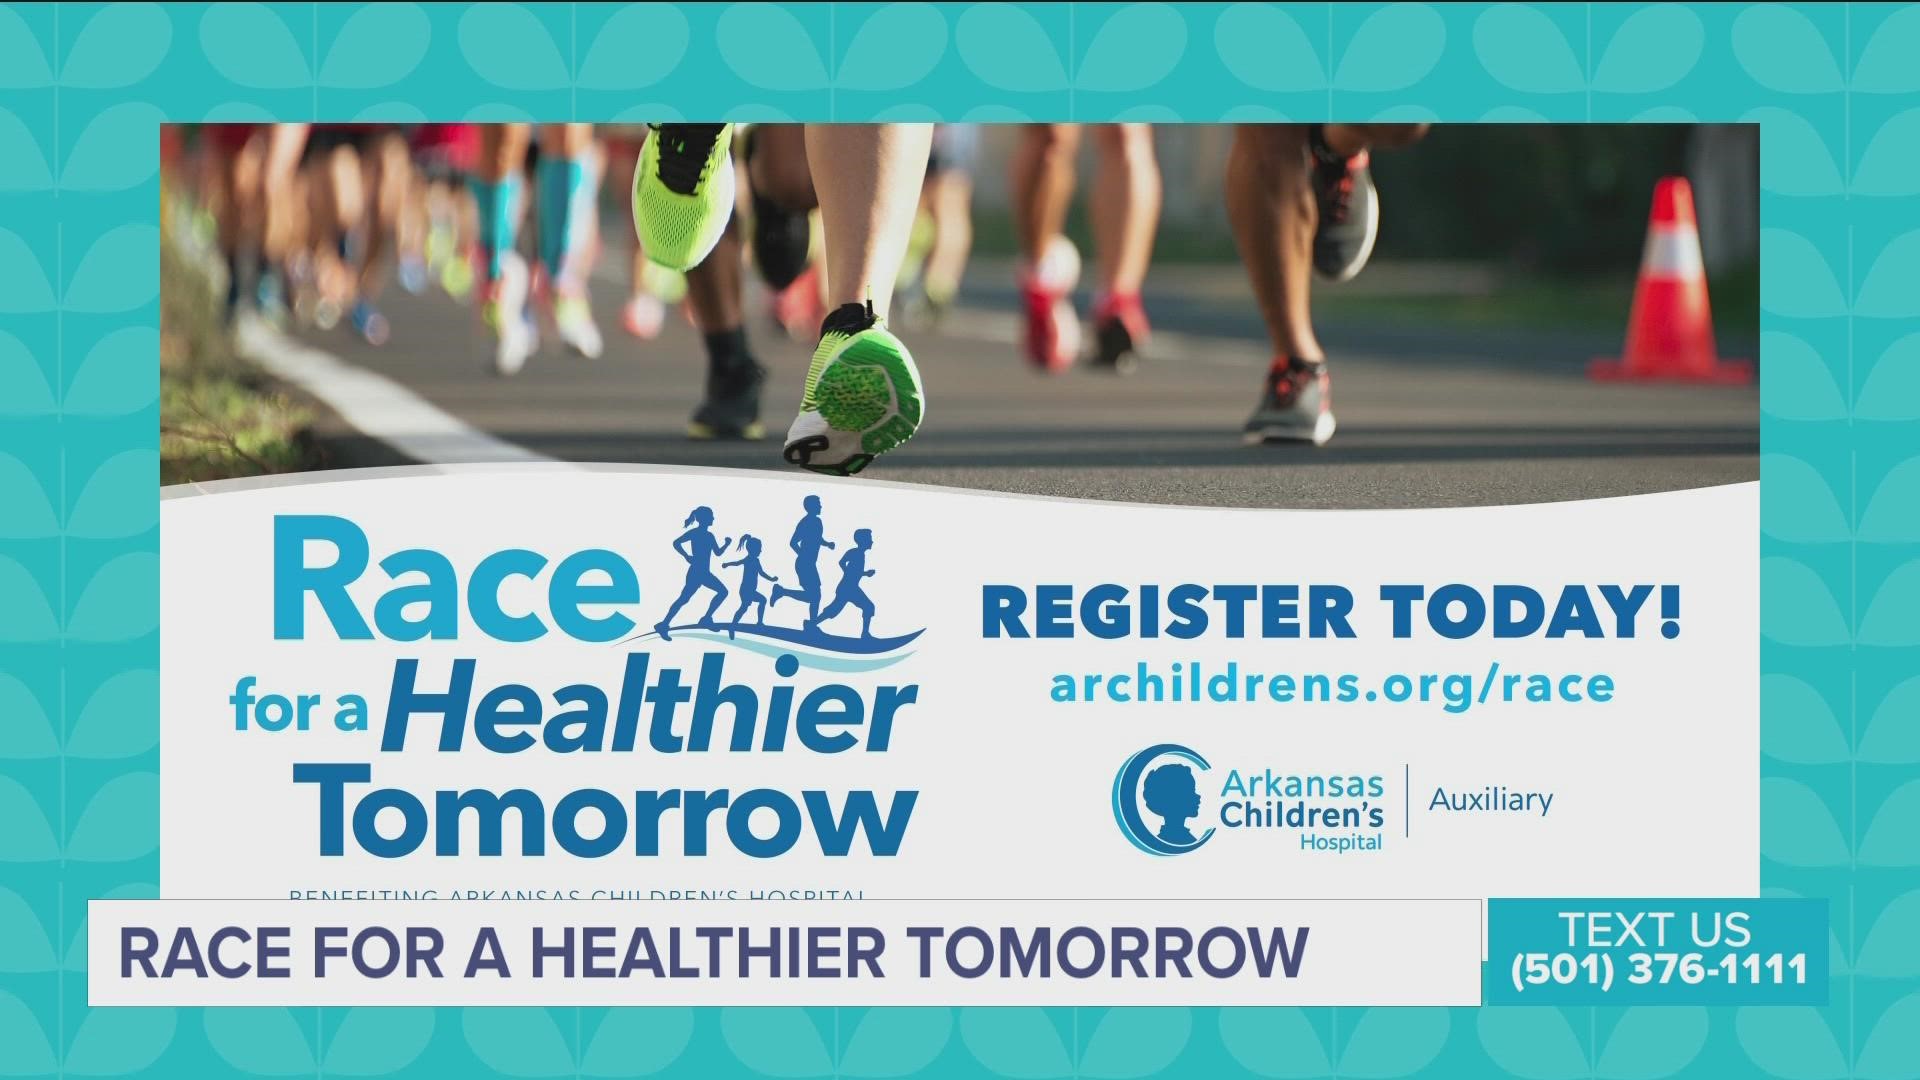 It’s time to lace up your sneakers! The Arkansas Children’s Hospital Auxiliary is hosting the 4th annual Race for a Healthier Tomorrow on Saturday, October 8.